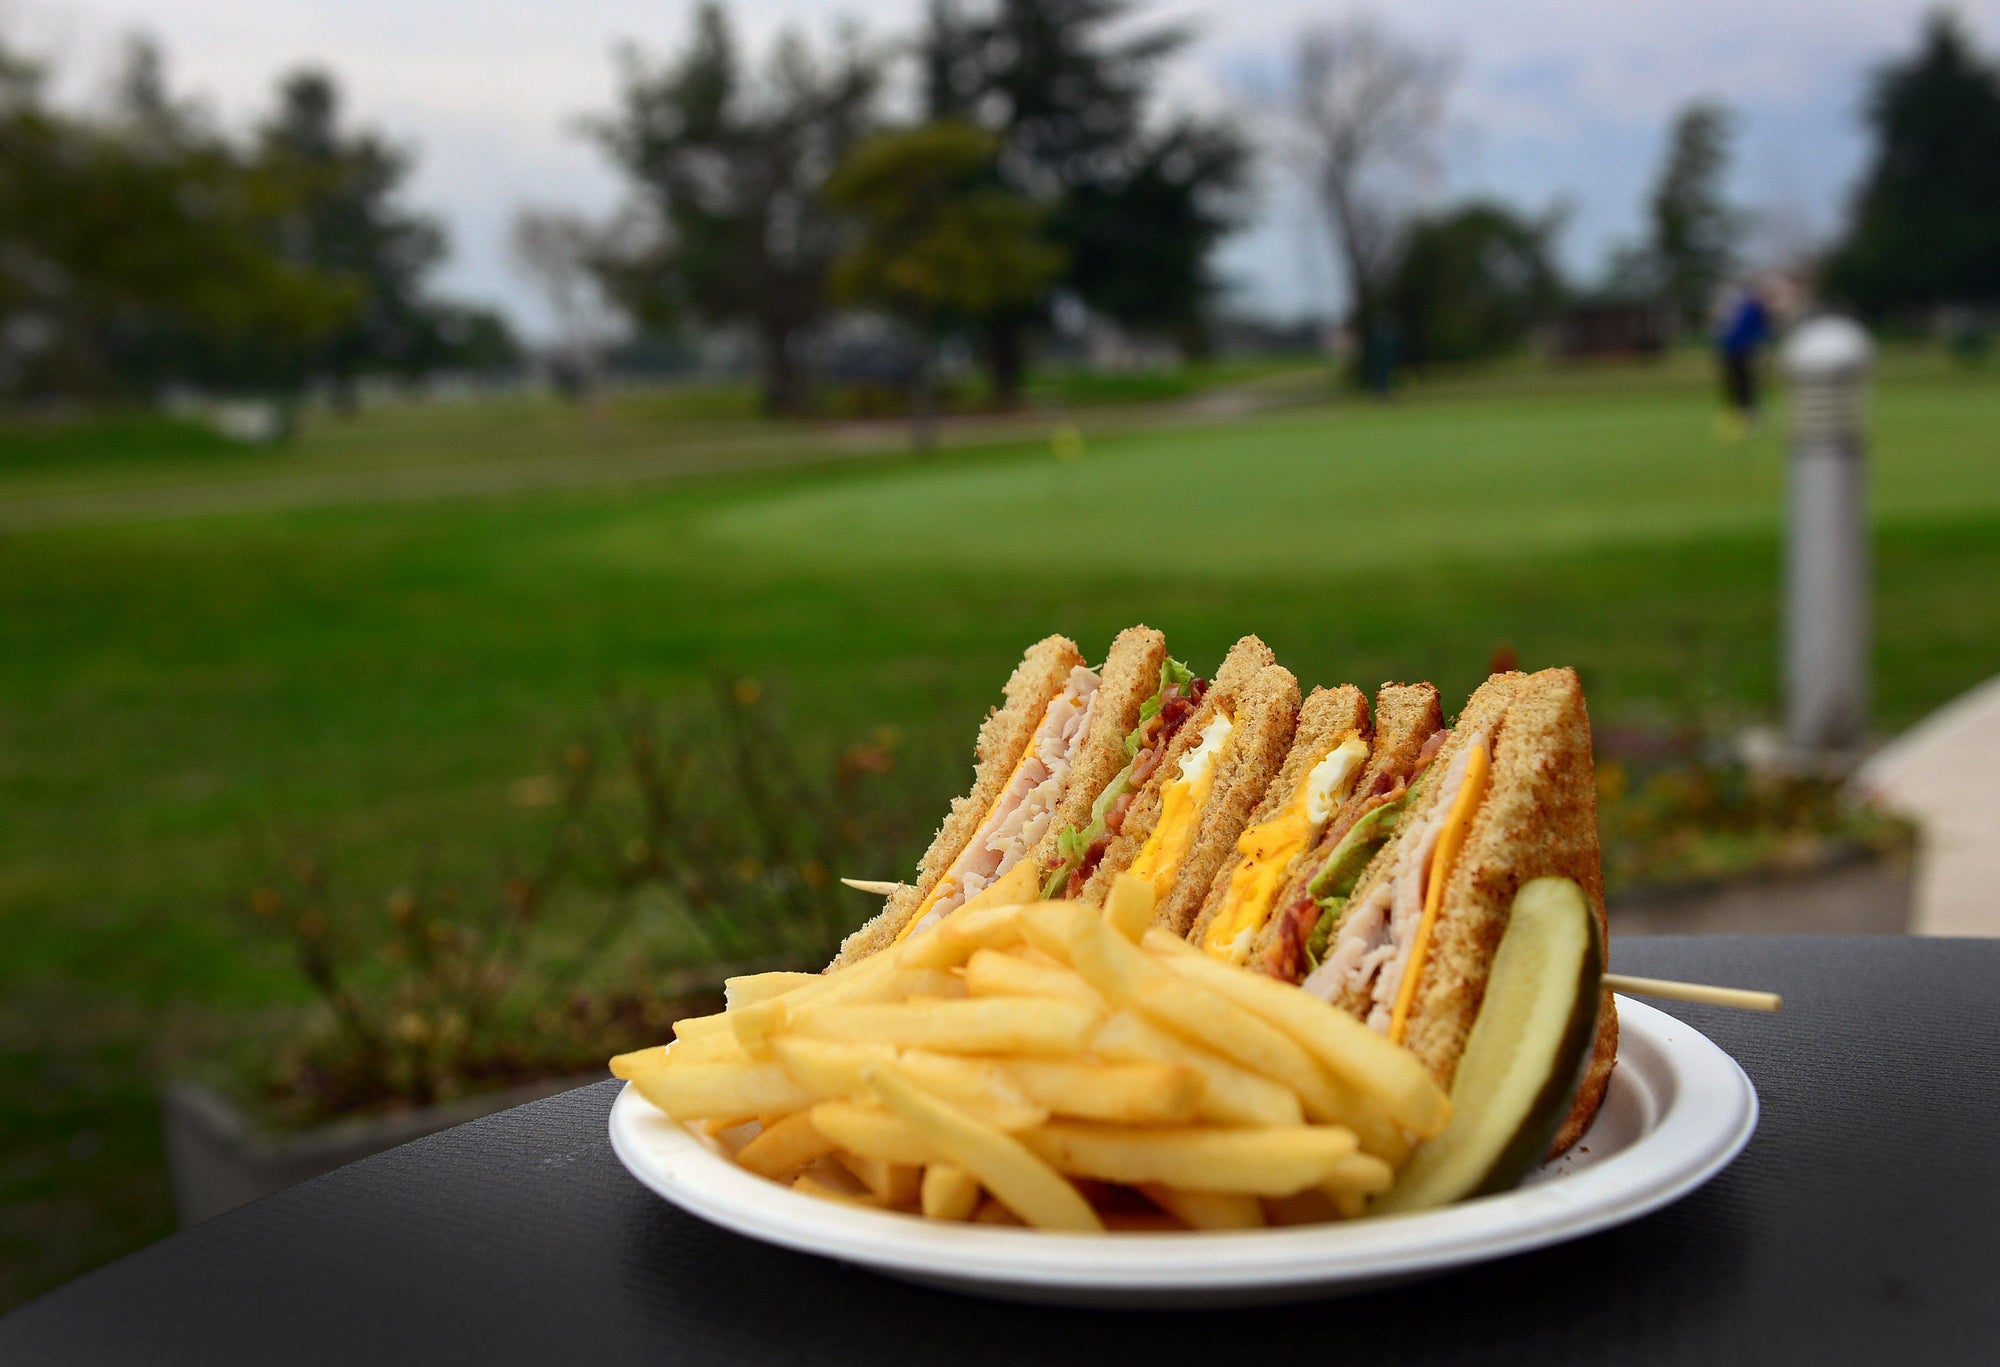 I’m Starving: Best Bites to Get at The Golf Course